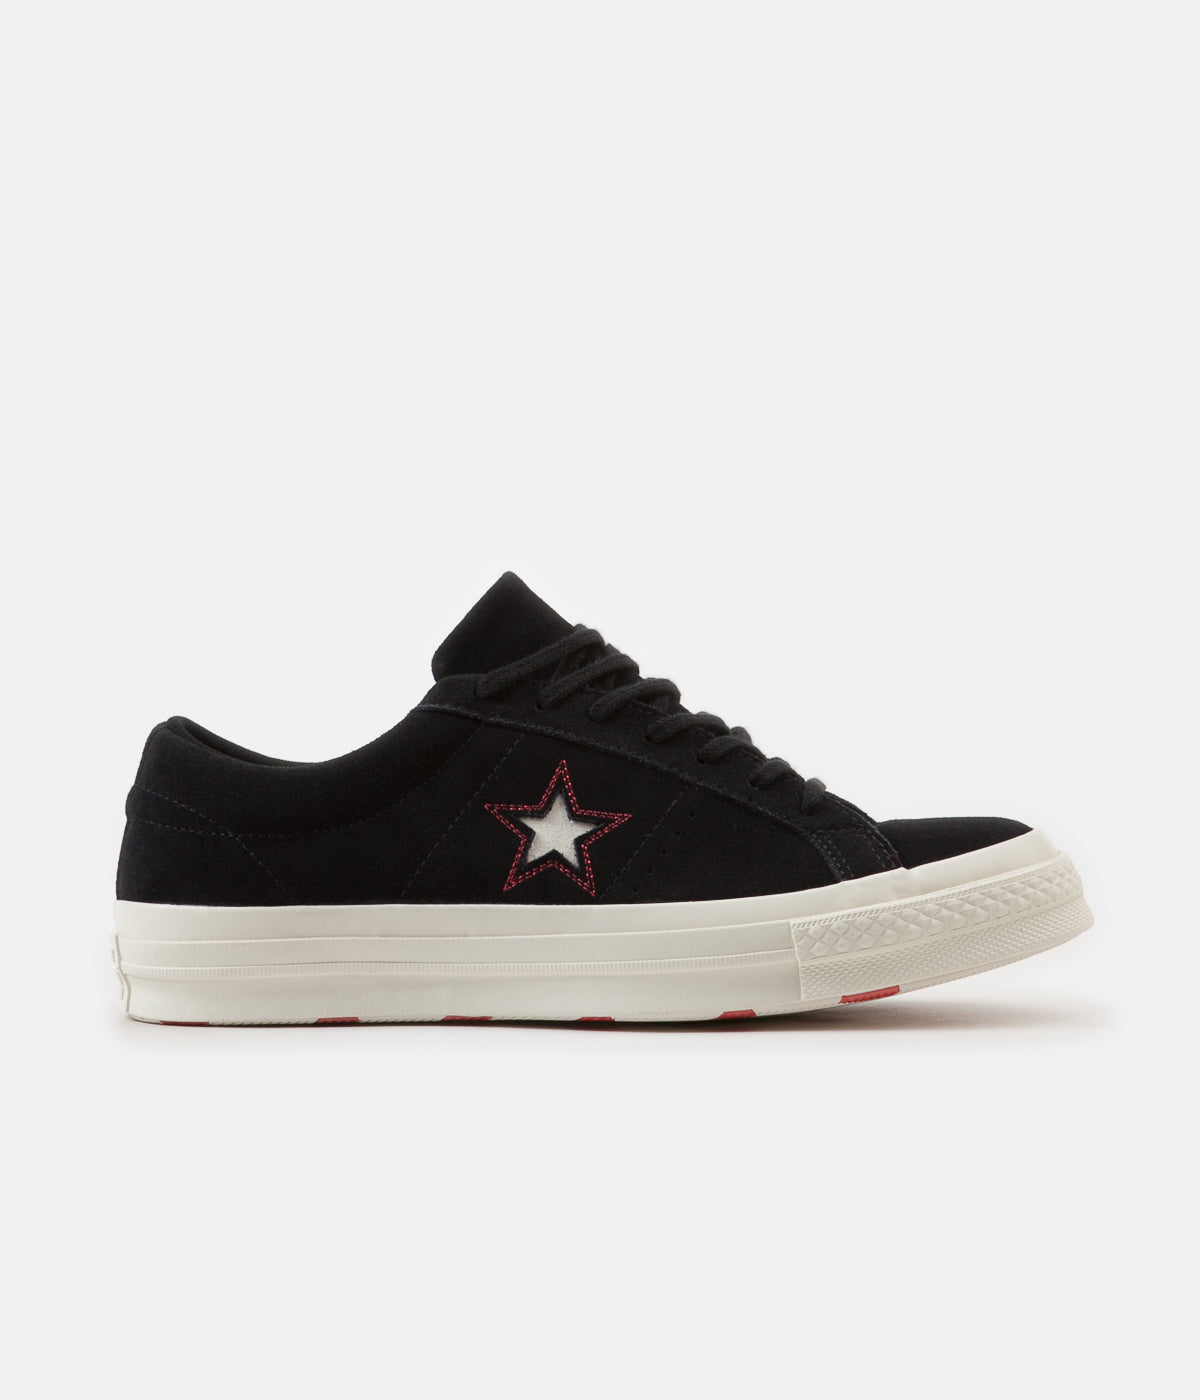 Converse One Star Ox Shoes - Black 